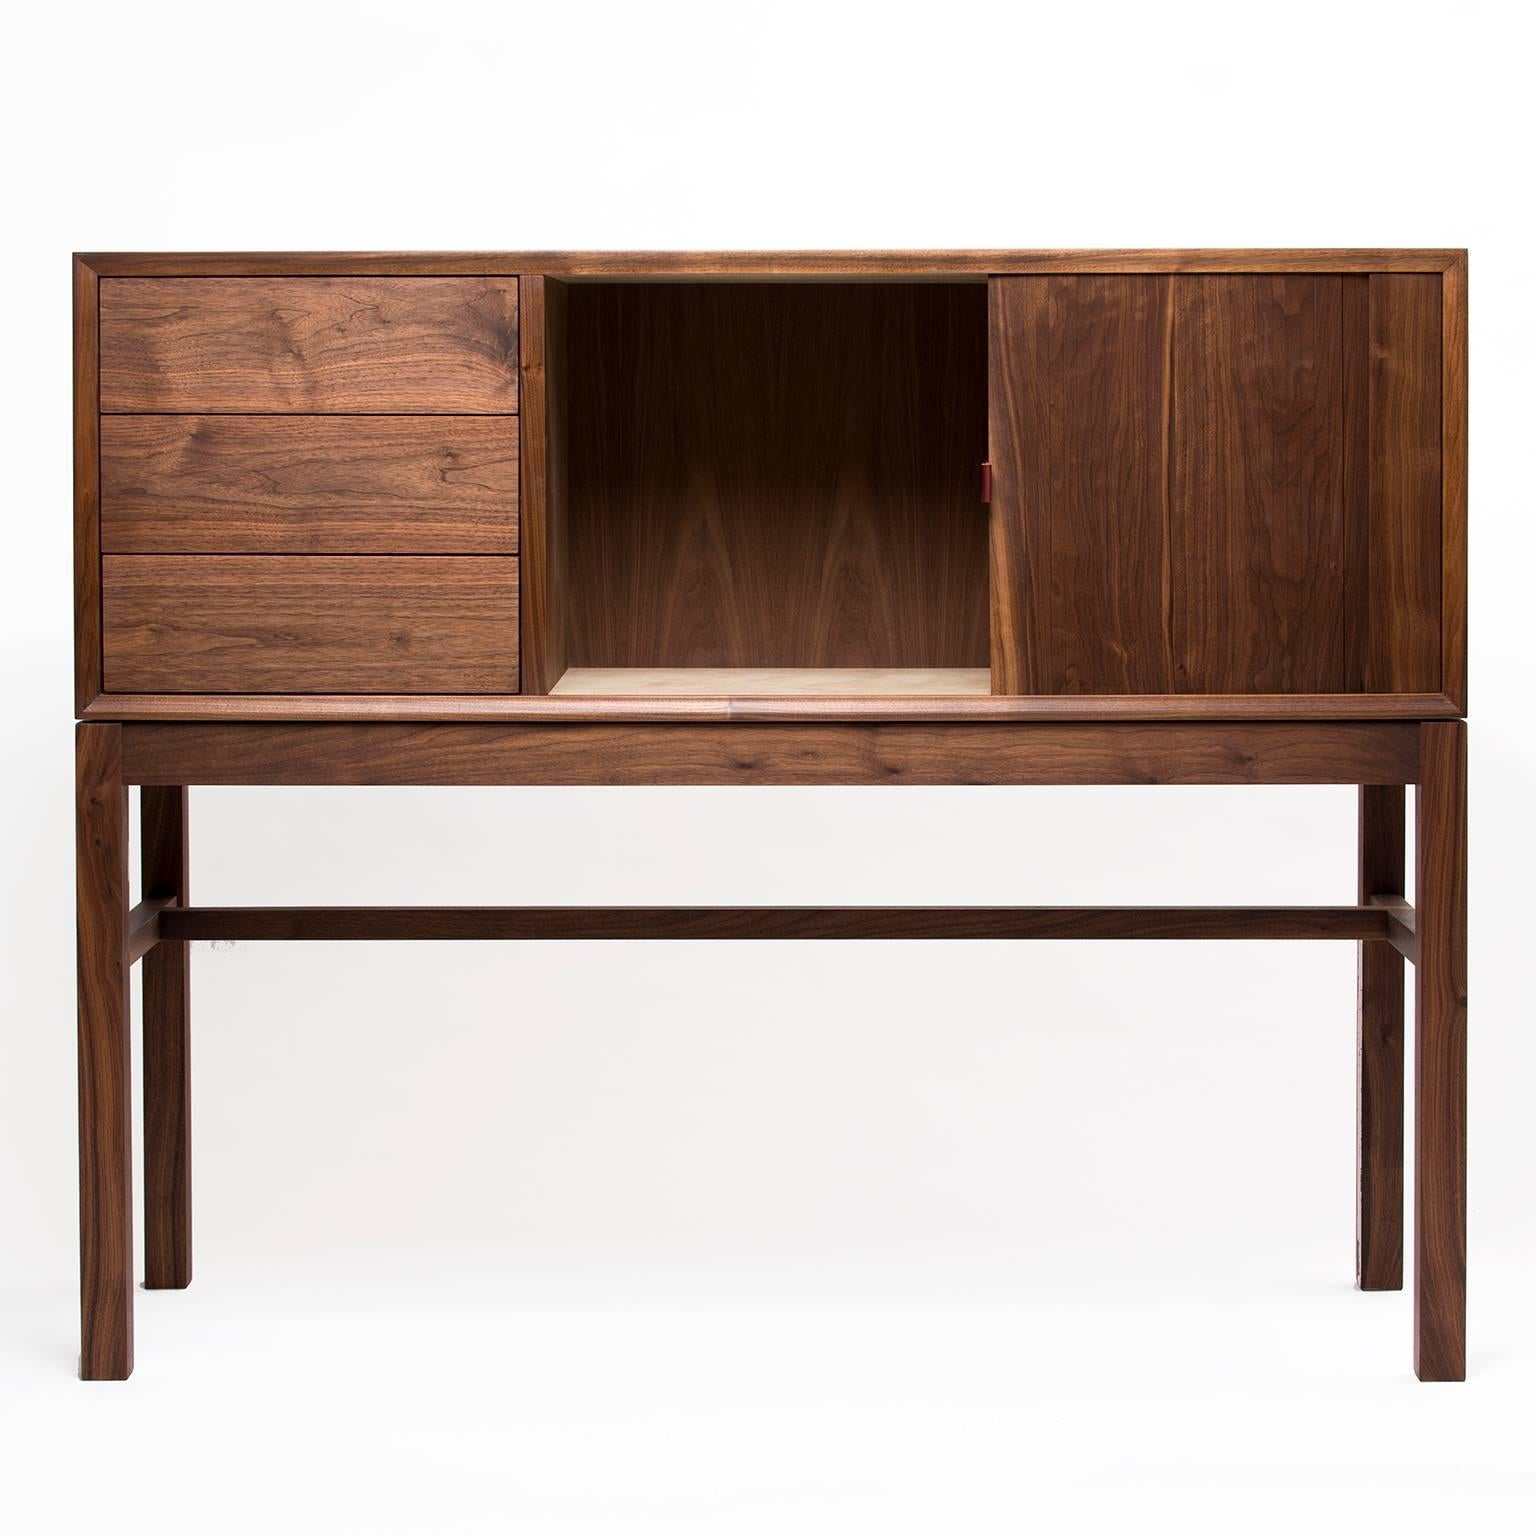 Walnut cabinet that can function as a sideboard, hutch or bar, with a tambour door that disappears to the right as you open. Hand-stitched leather pulls on the drawers and door, with solid maple drawer boxes and wood-on-wood drawer slides.